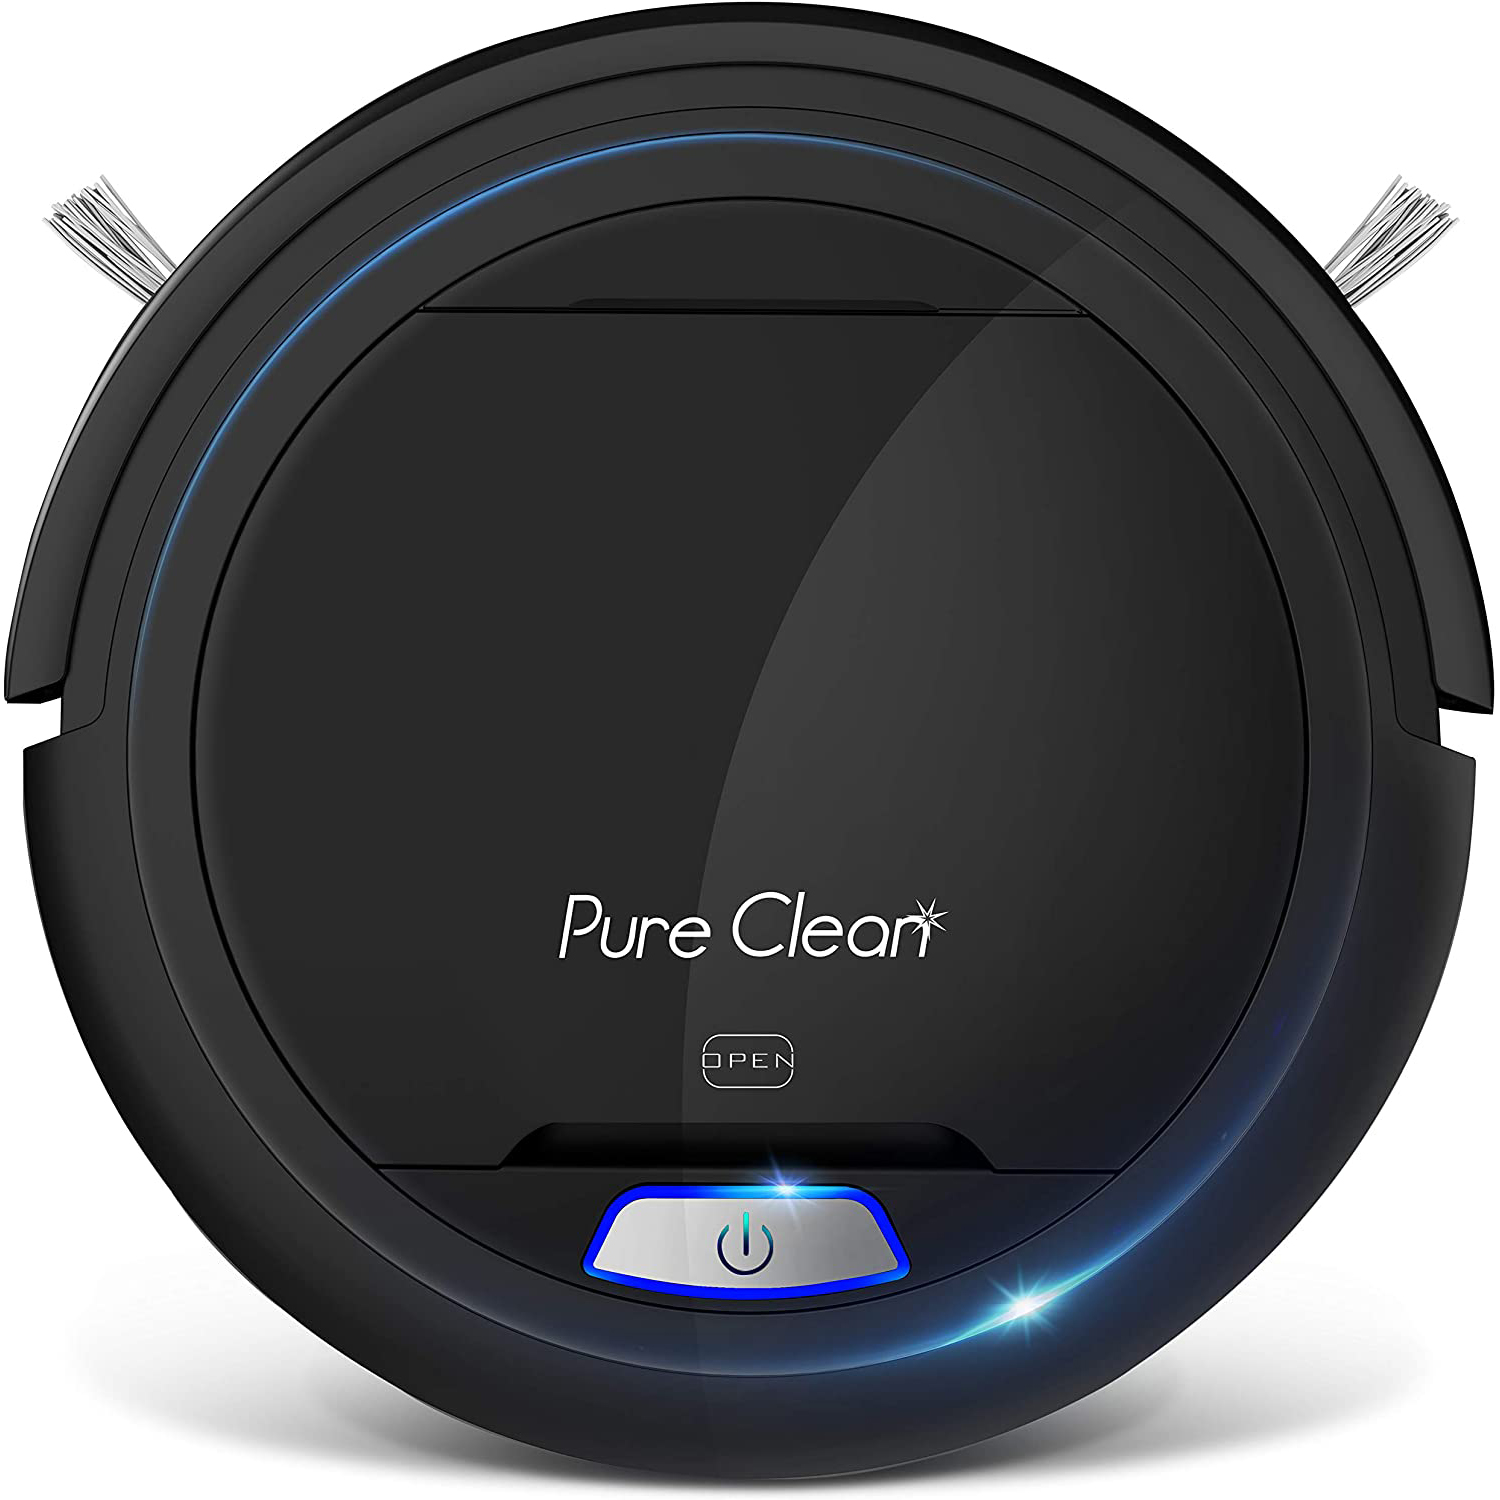 Pyle PureClean Smart Automatic Robot Vacuum Powerful Home Cleaning System, Black - image 1 of 4